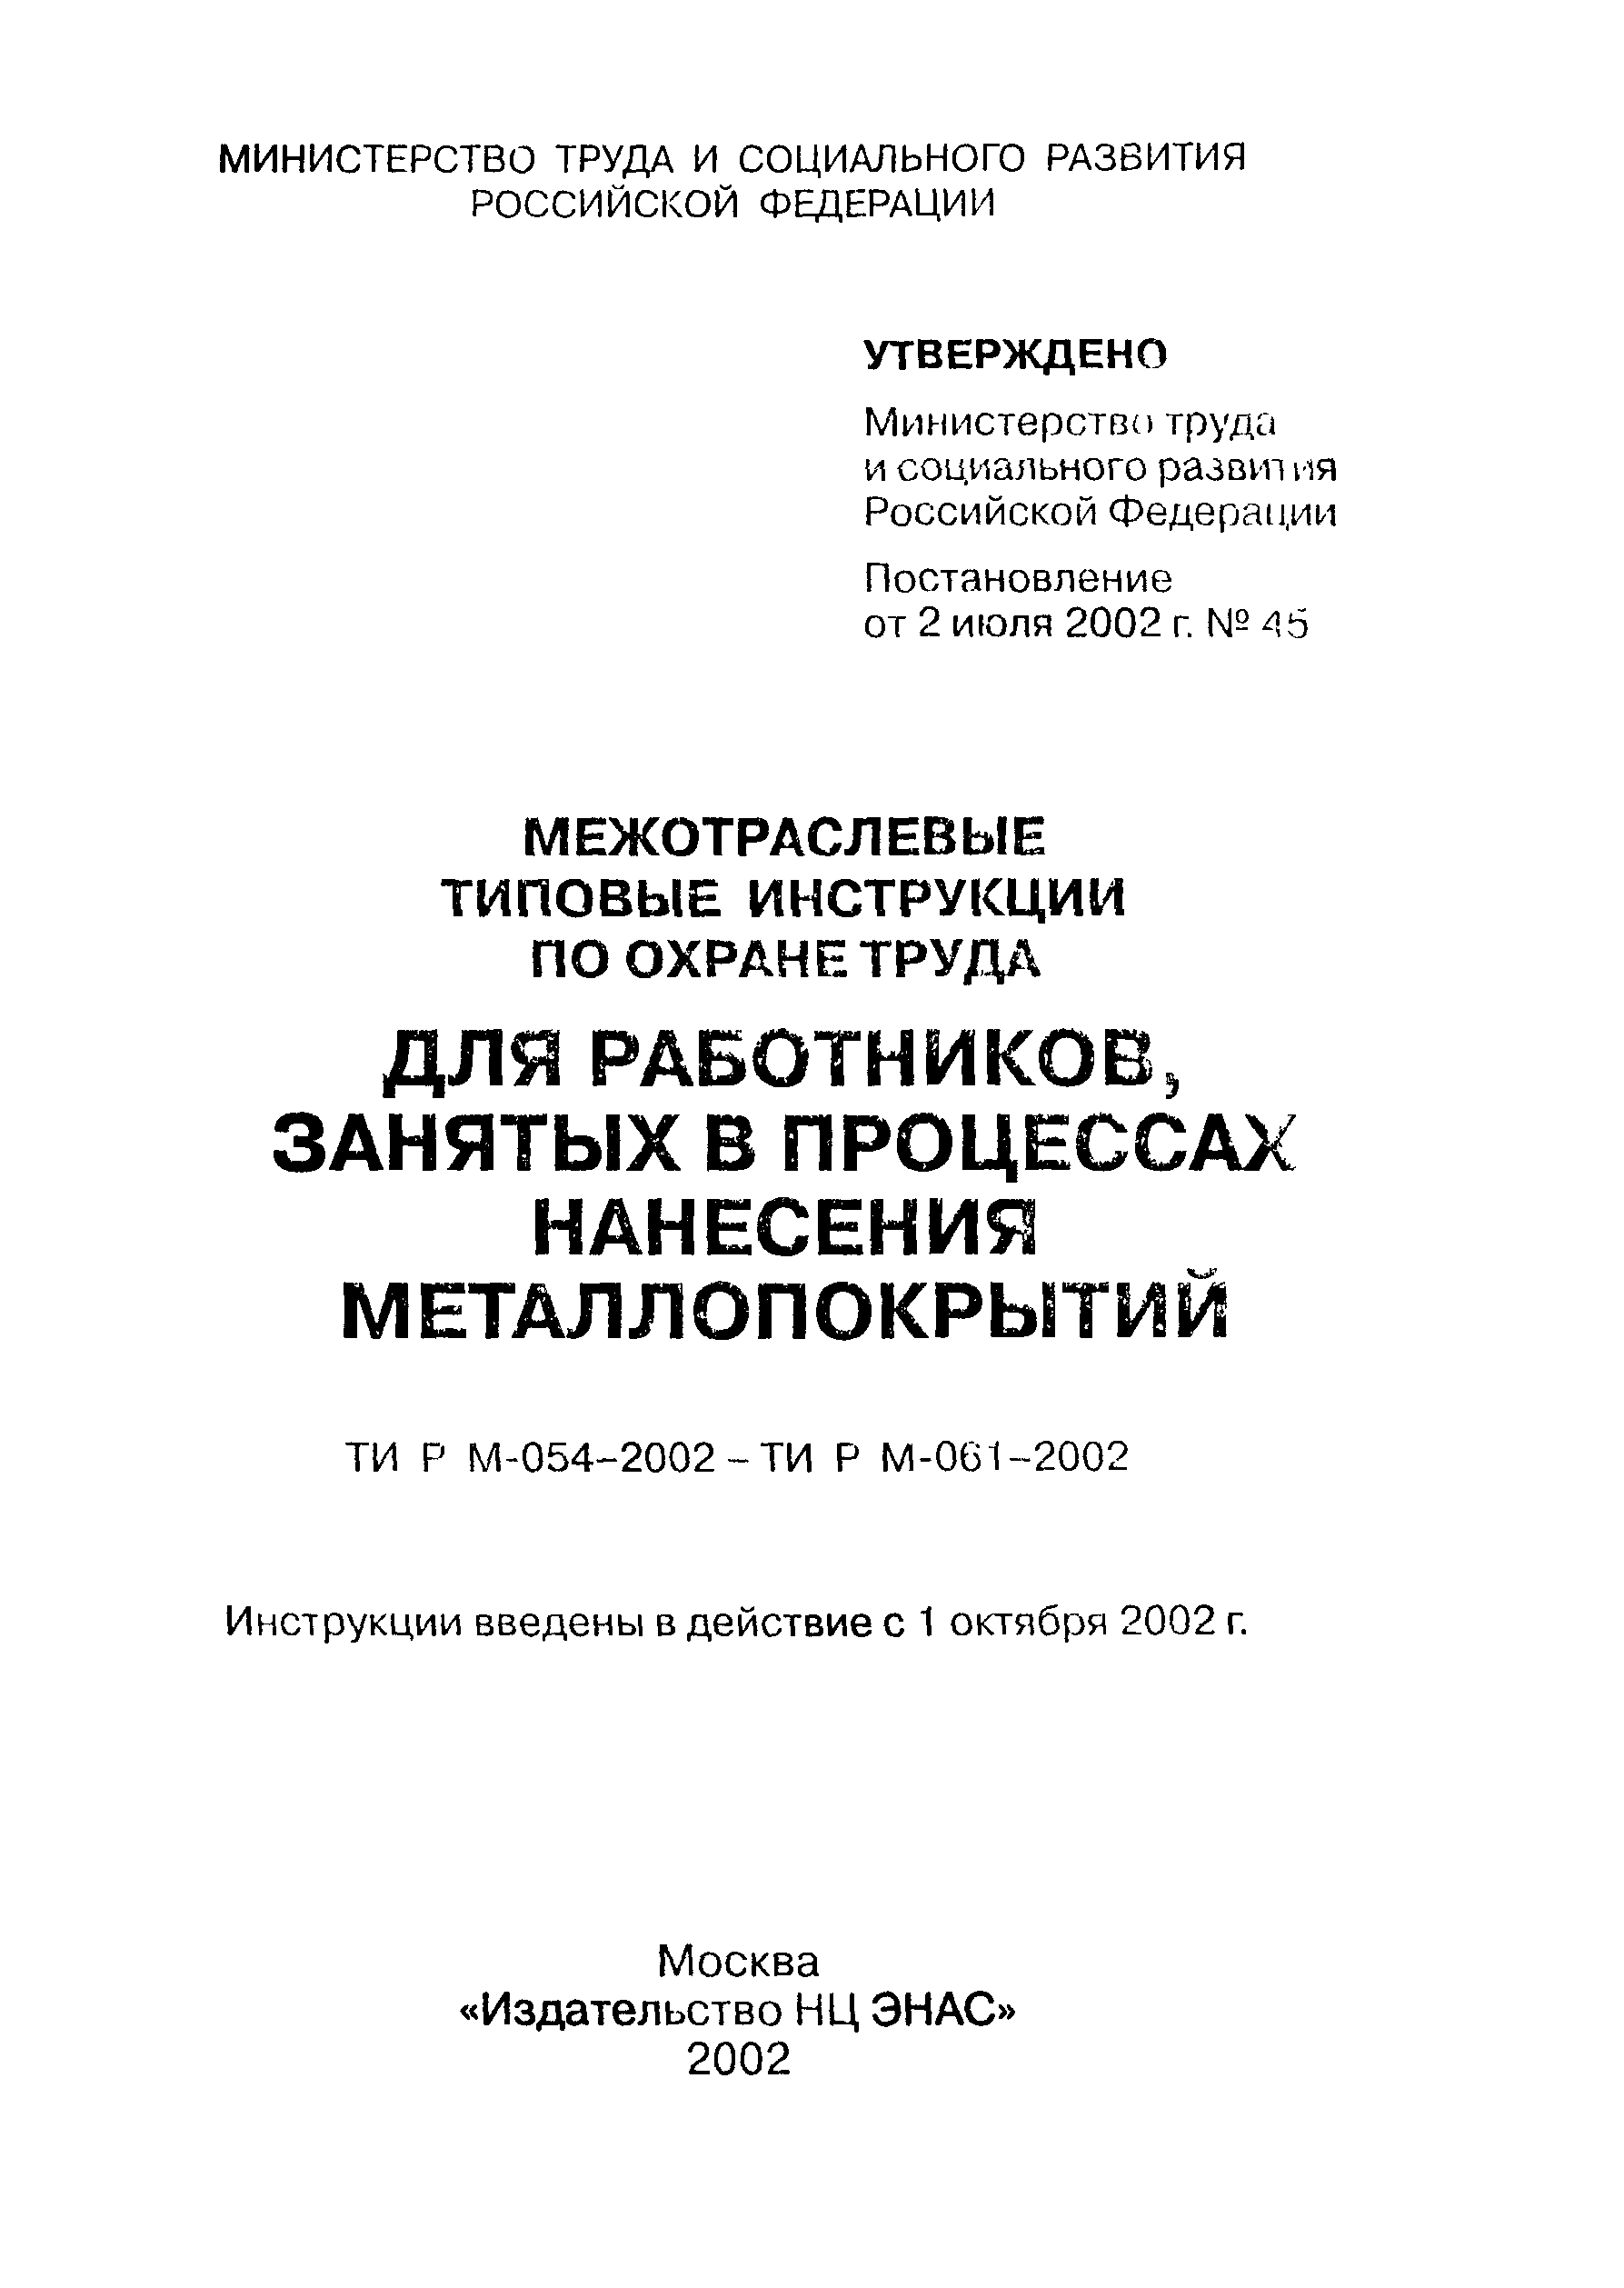 ТИ Р М-058-2002